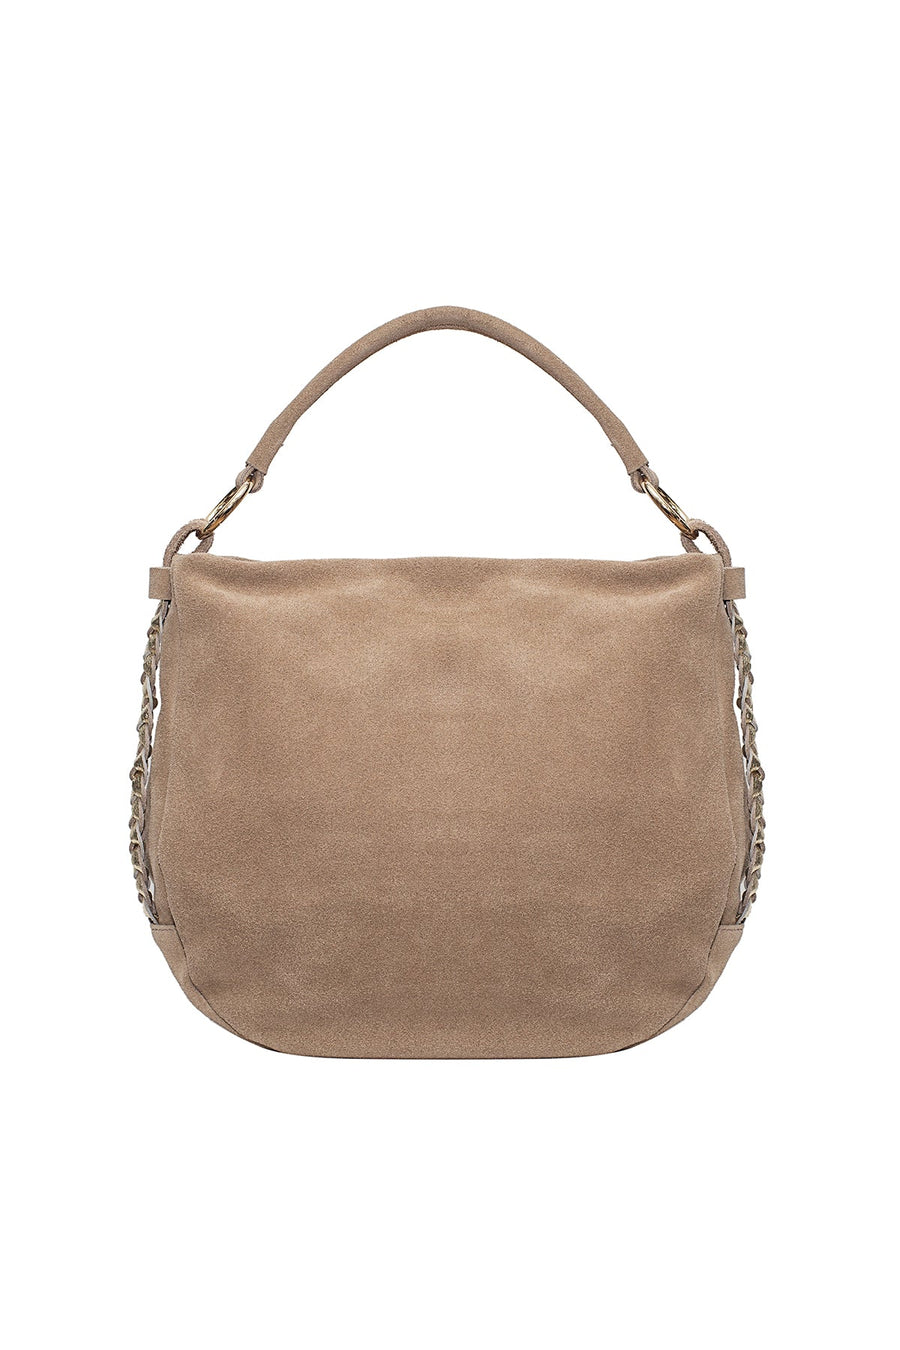 Sac Melodie taupe